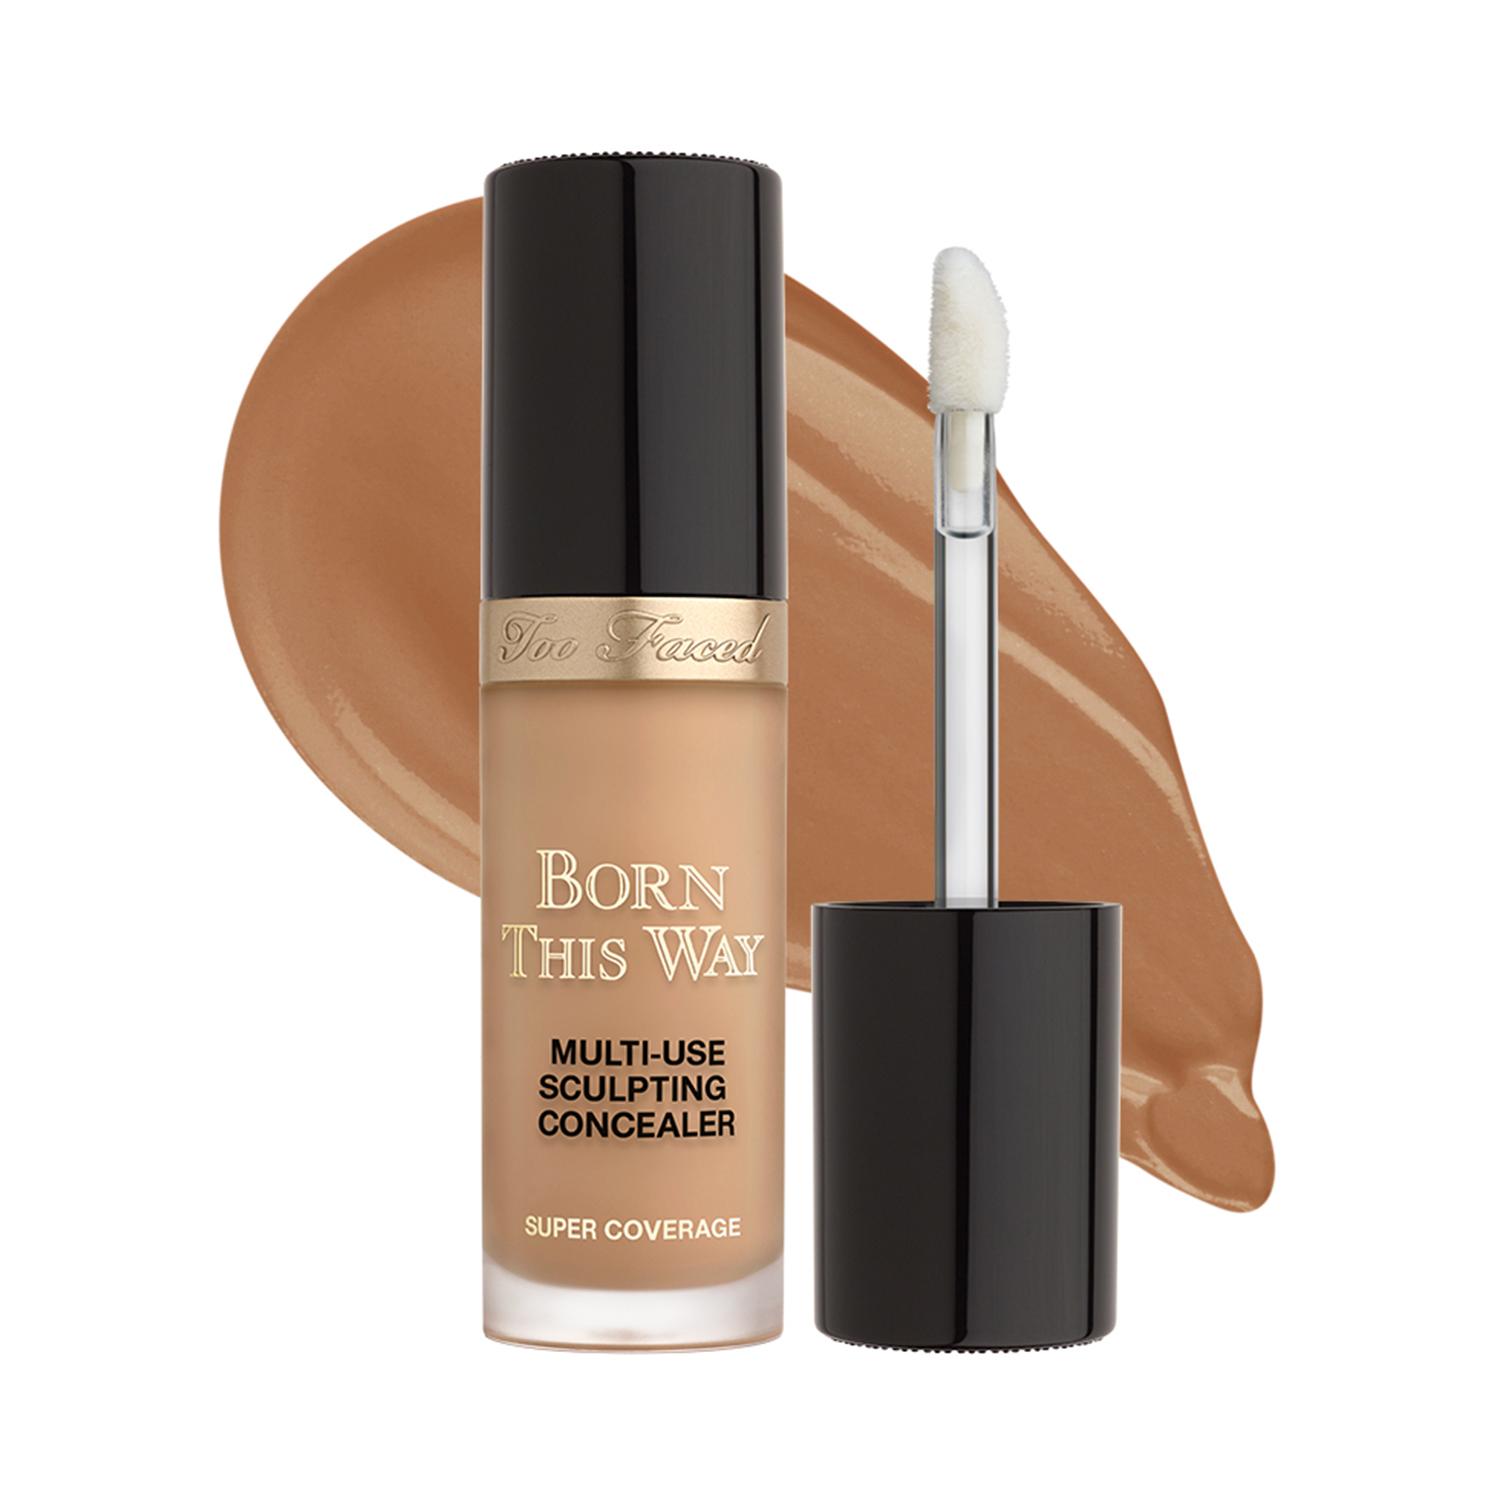 Too Faced Born This Way Super Coverage Multi Use Sculpting Concealer - Honey (13.5ml)